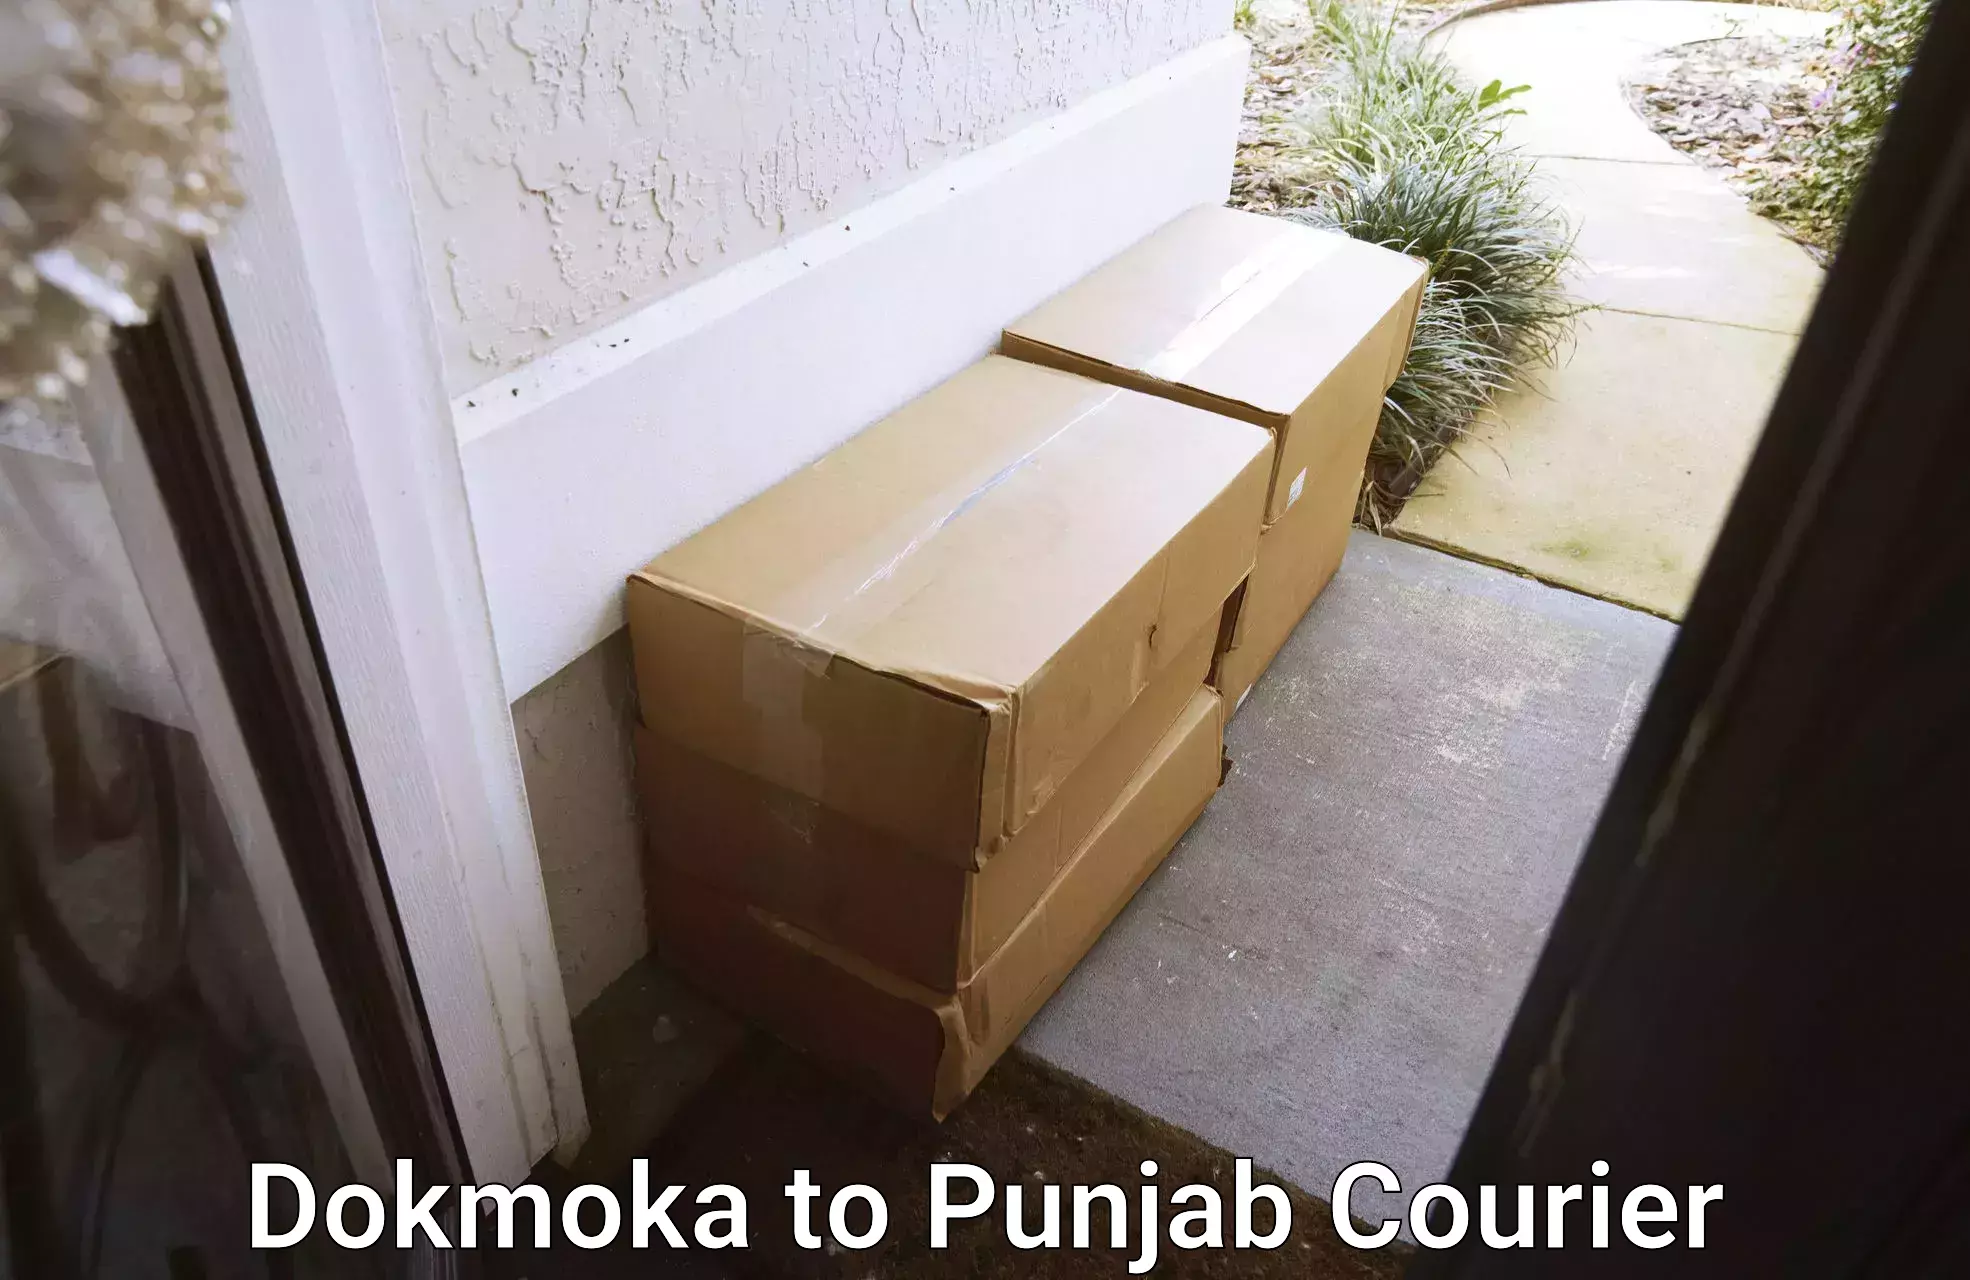 Personal parcel delivery Dokmoka to Patiala